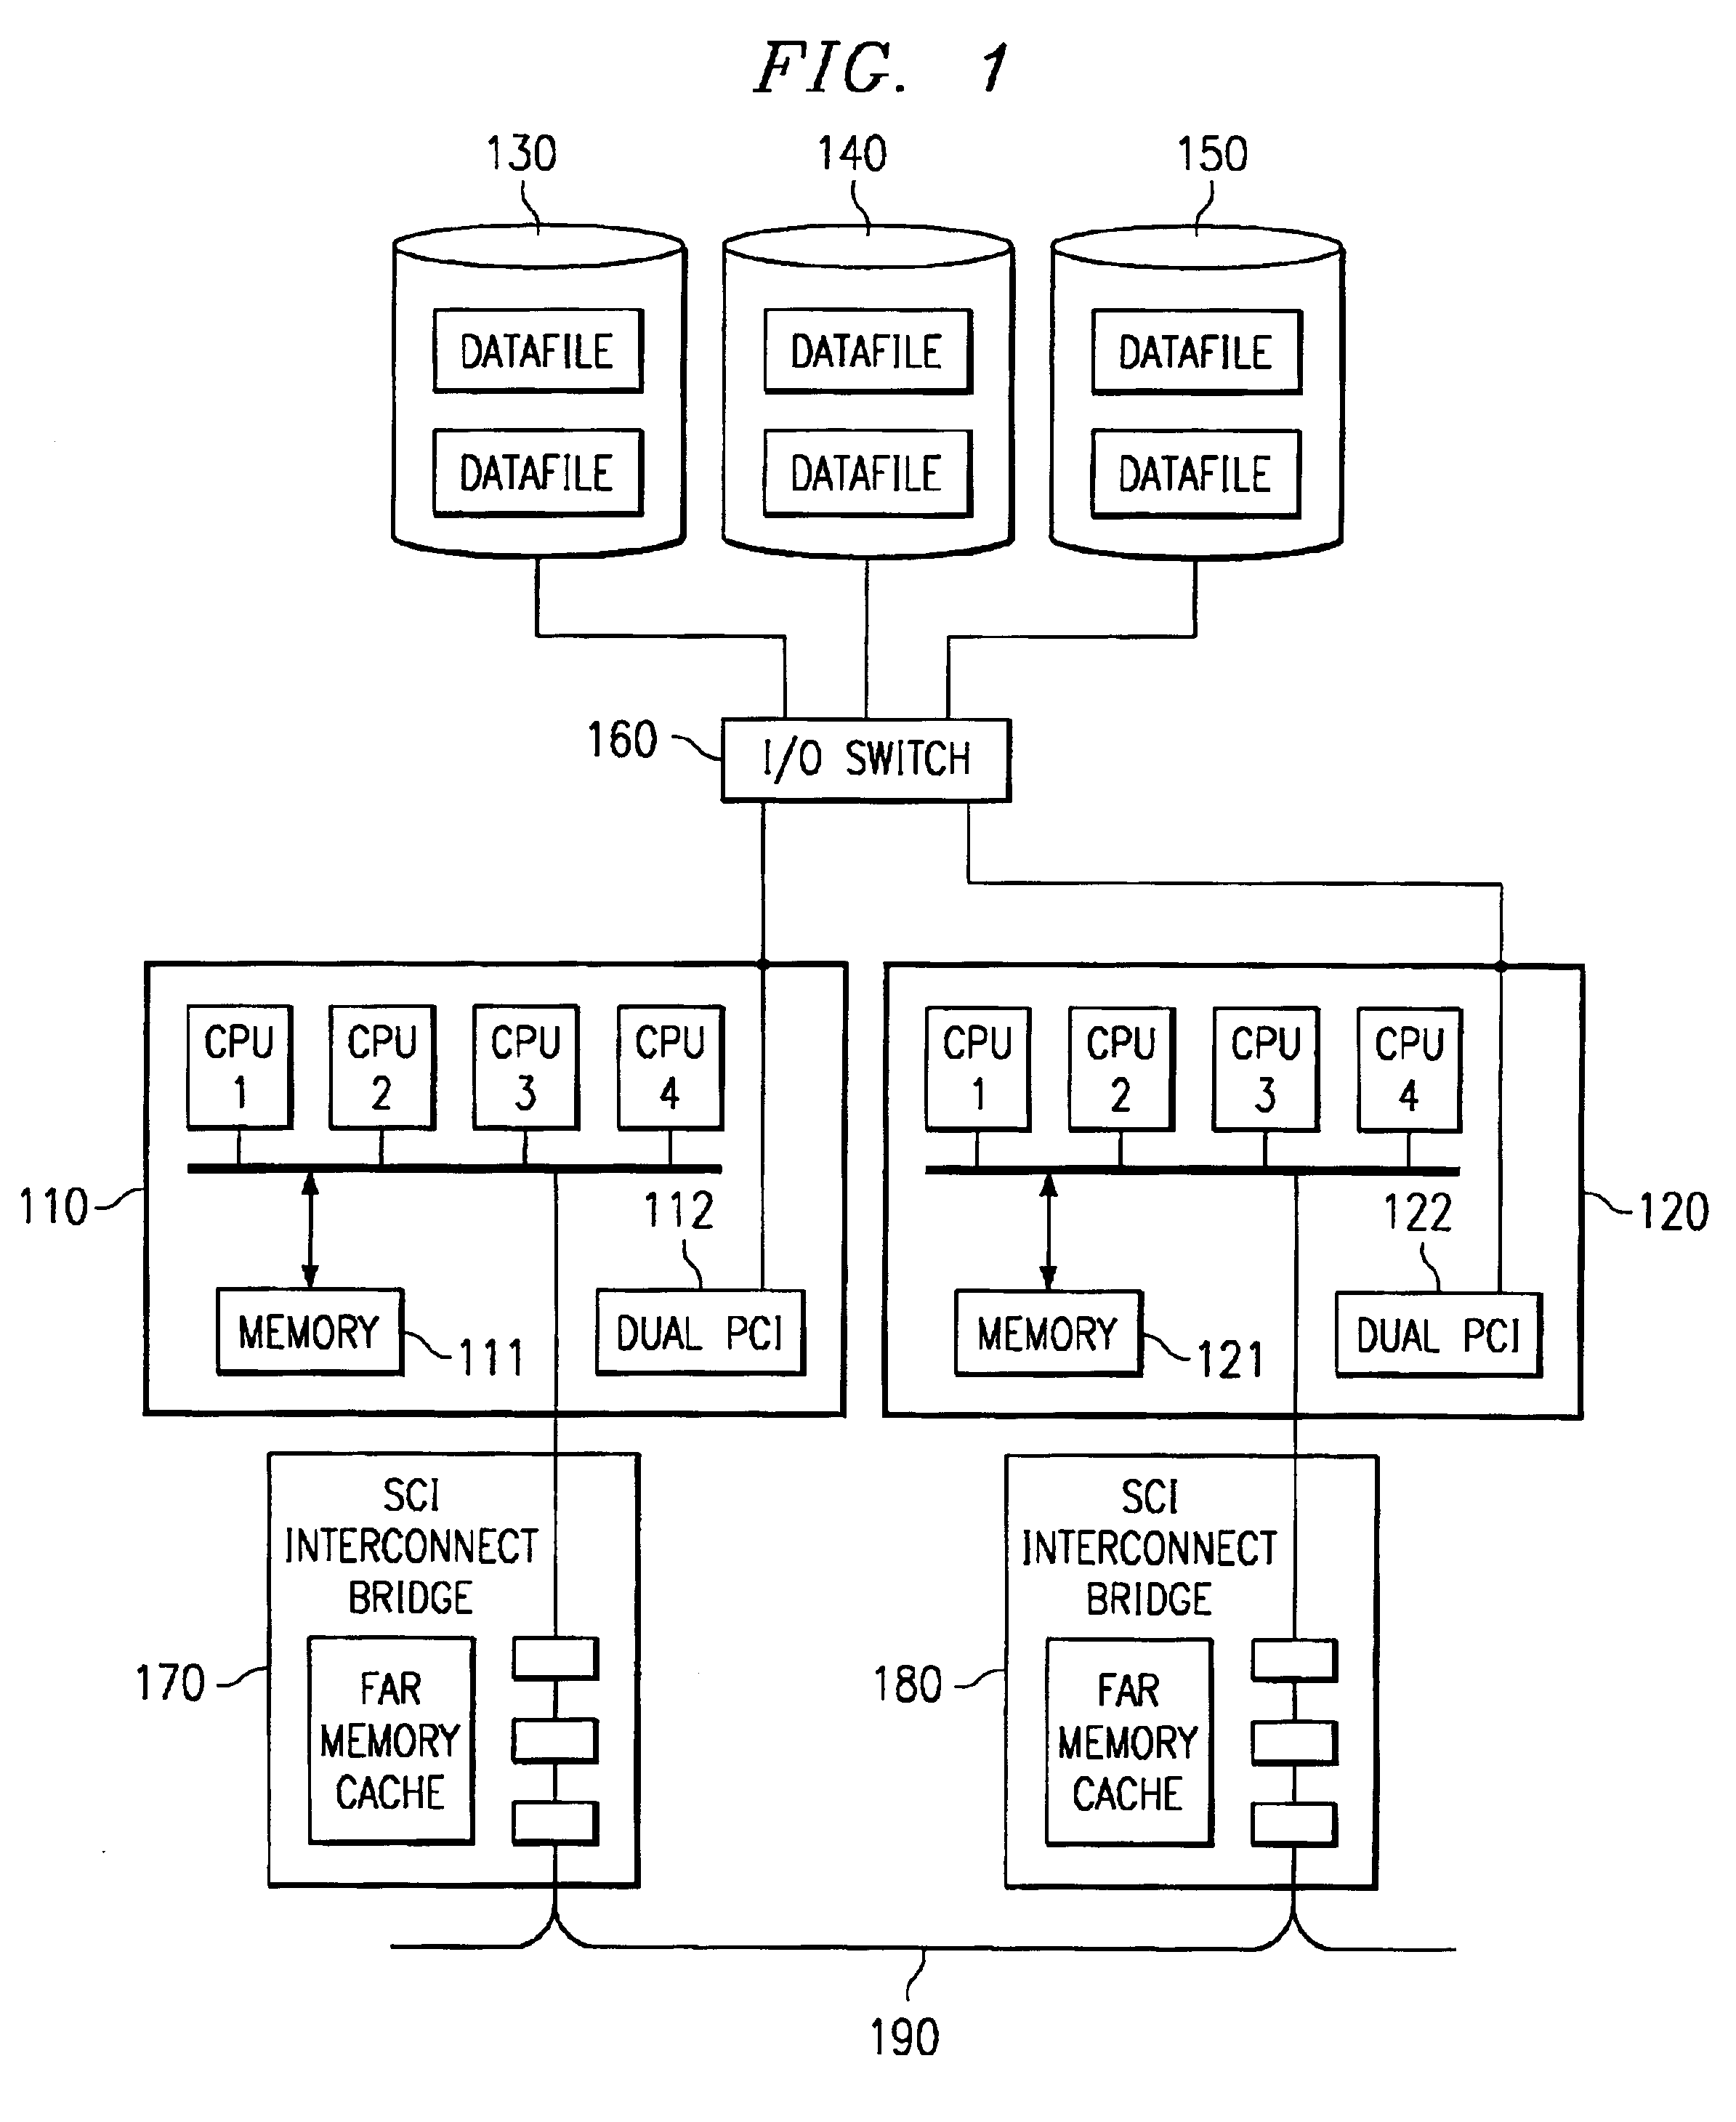 Apparatus, method and computer program product for converting simple locks in a multiprocessor system